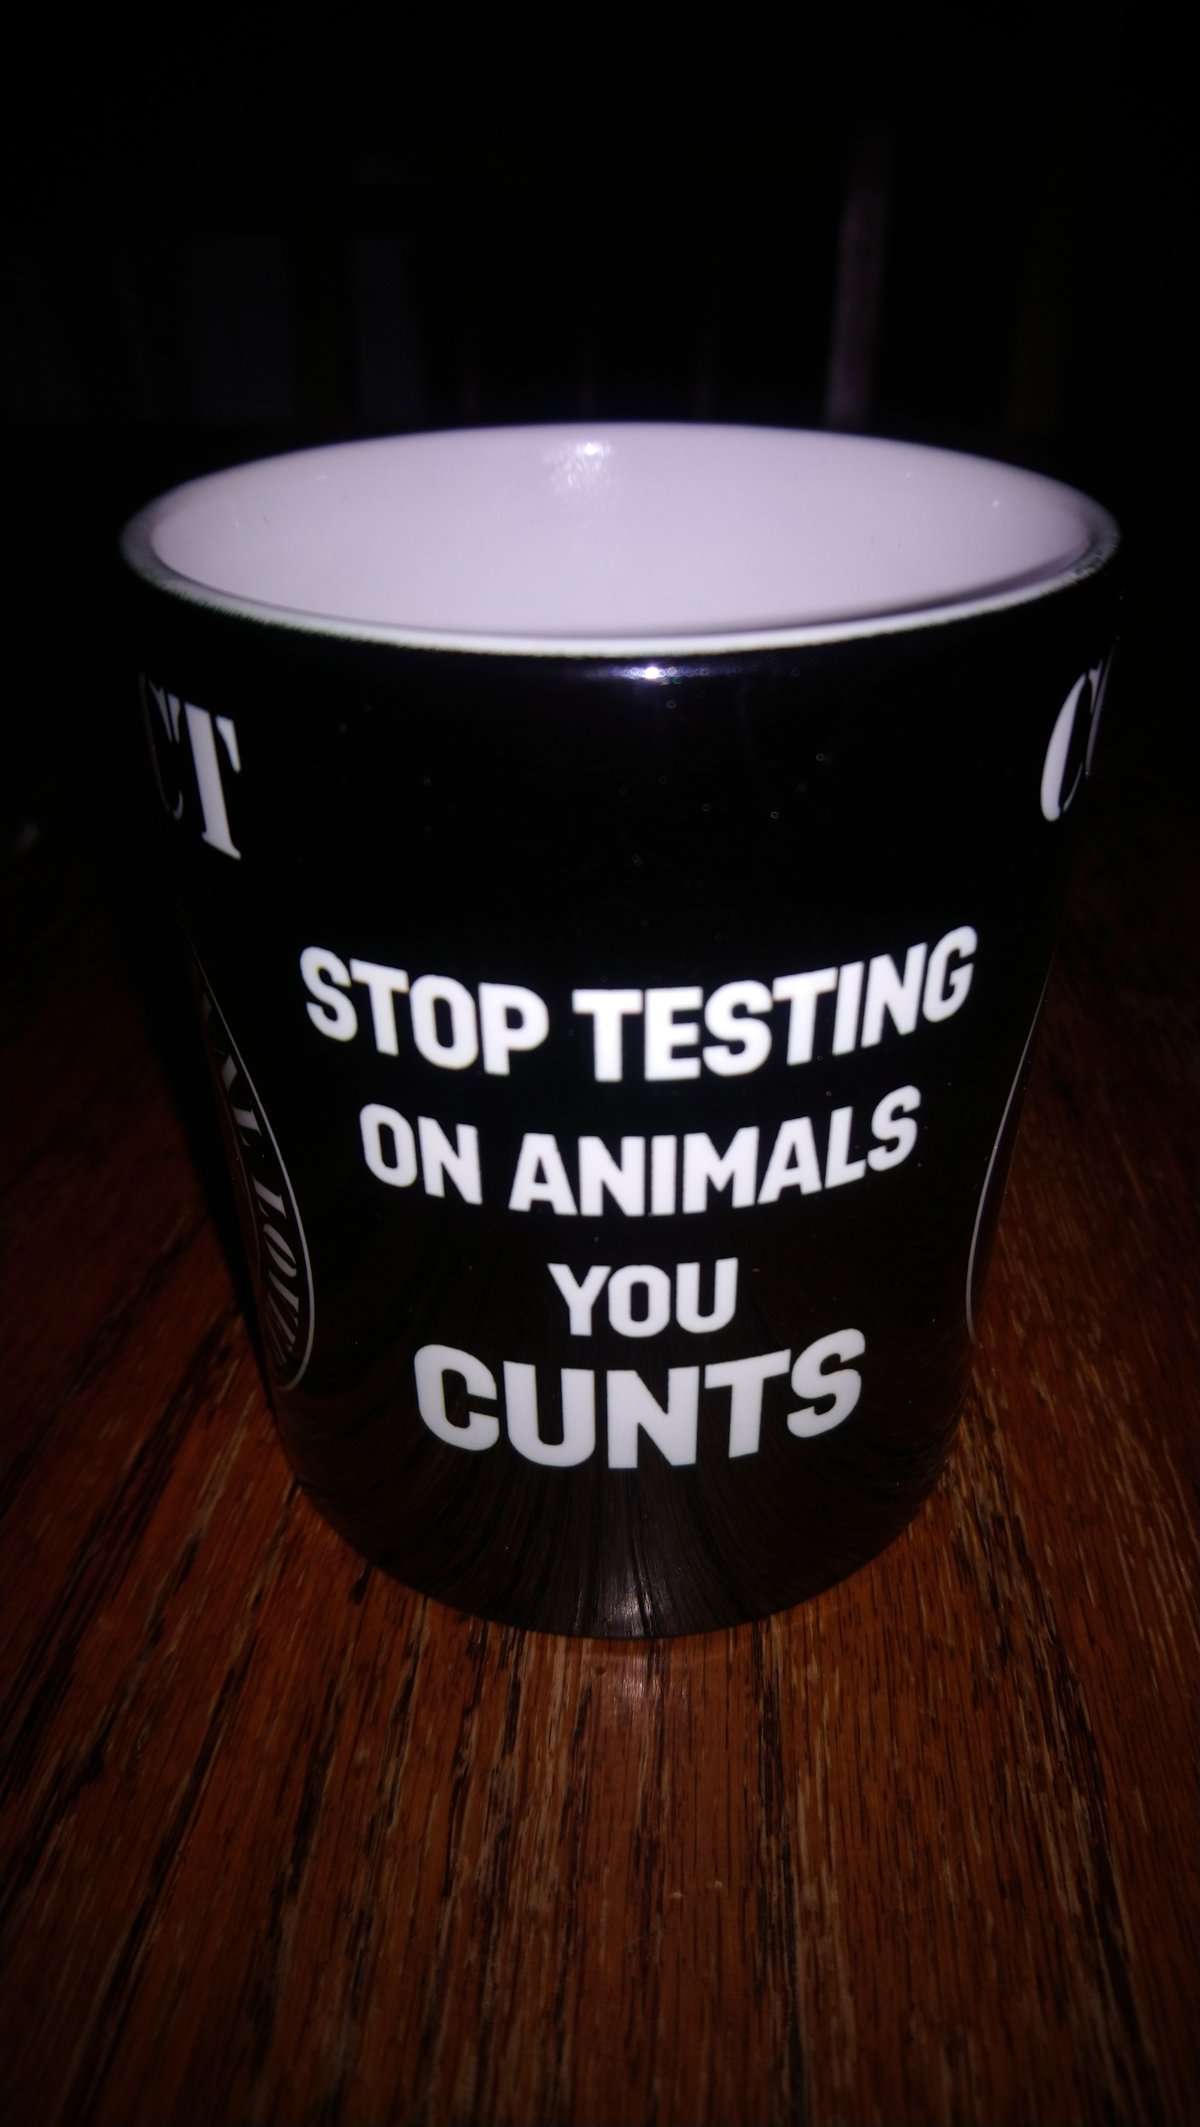 Image of CONFLICT To a Nation of Animal Lovers Mug